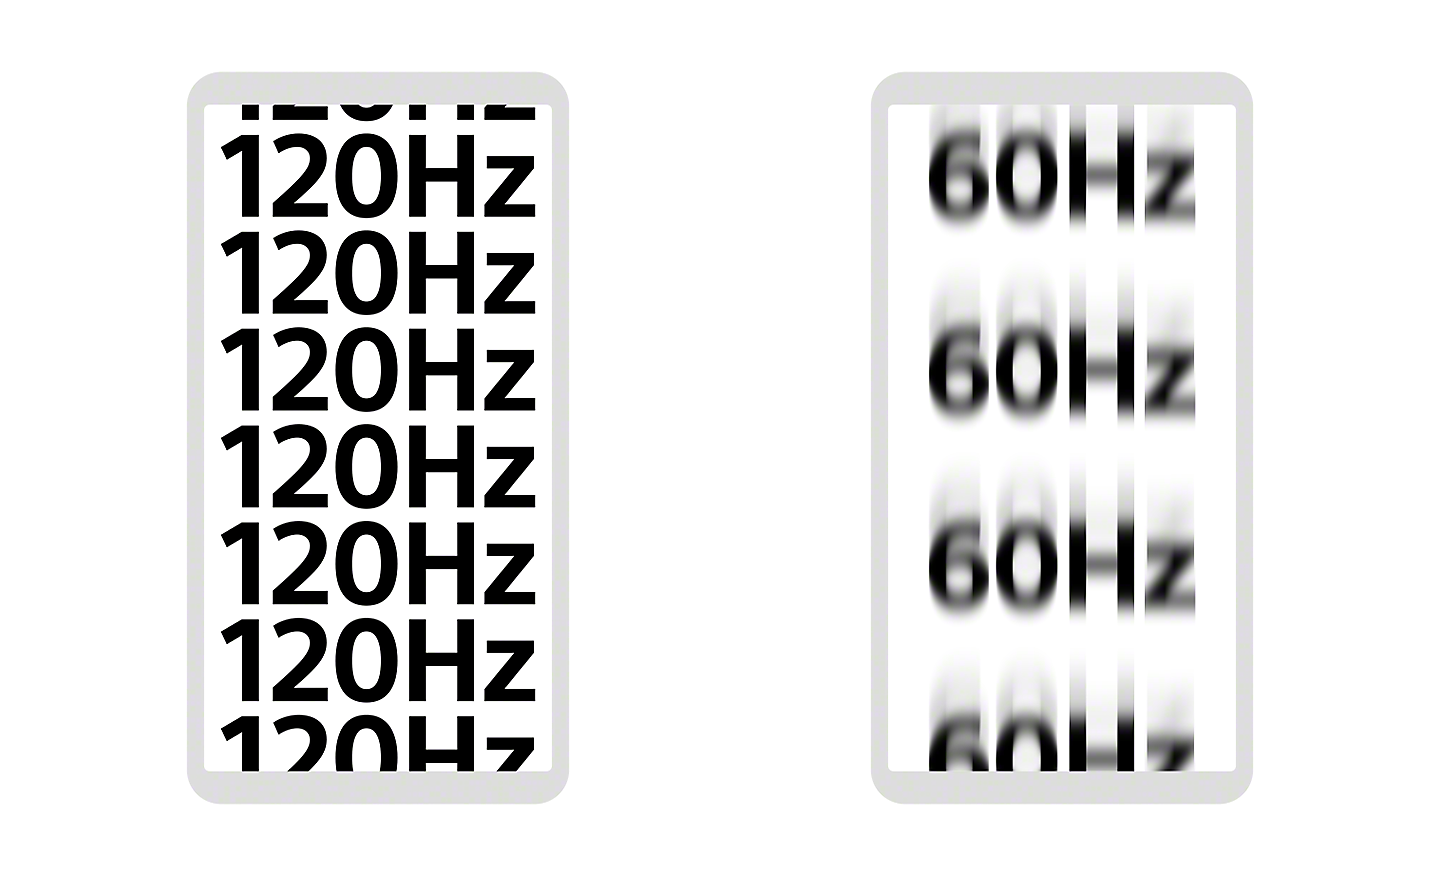 Illustration of two smartphone displays, one showing 120Hz in sharp focus, the other showing 60Hz slightly out of focus